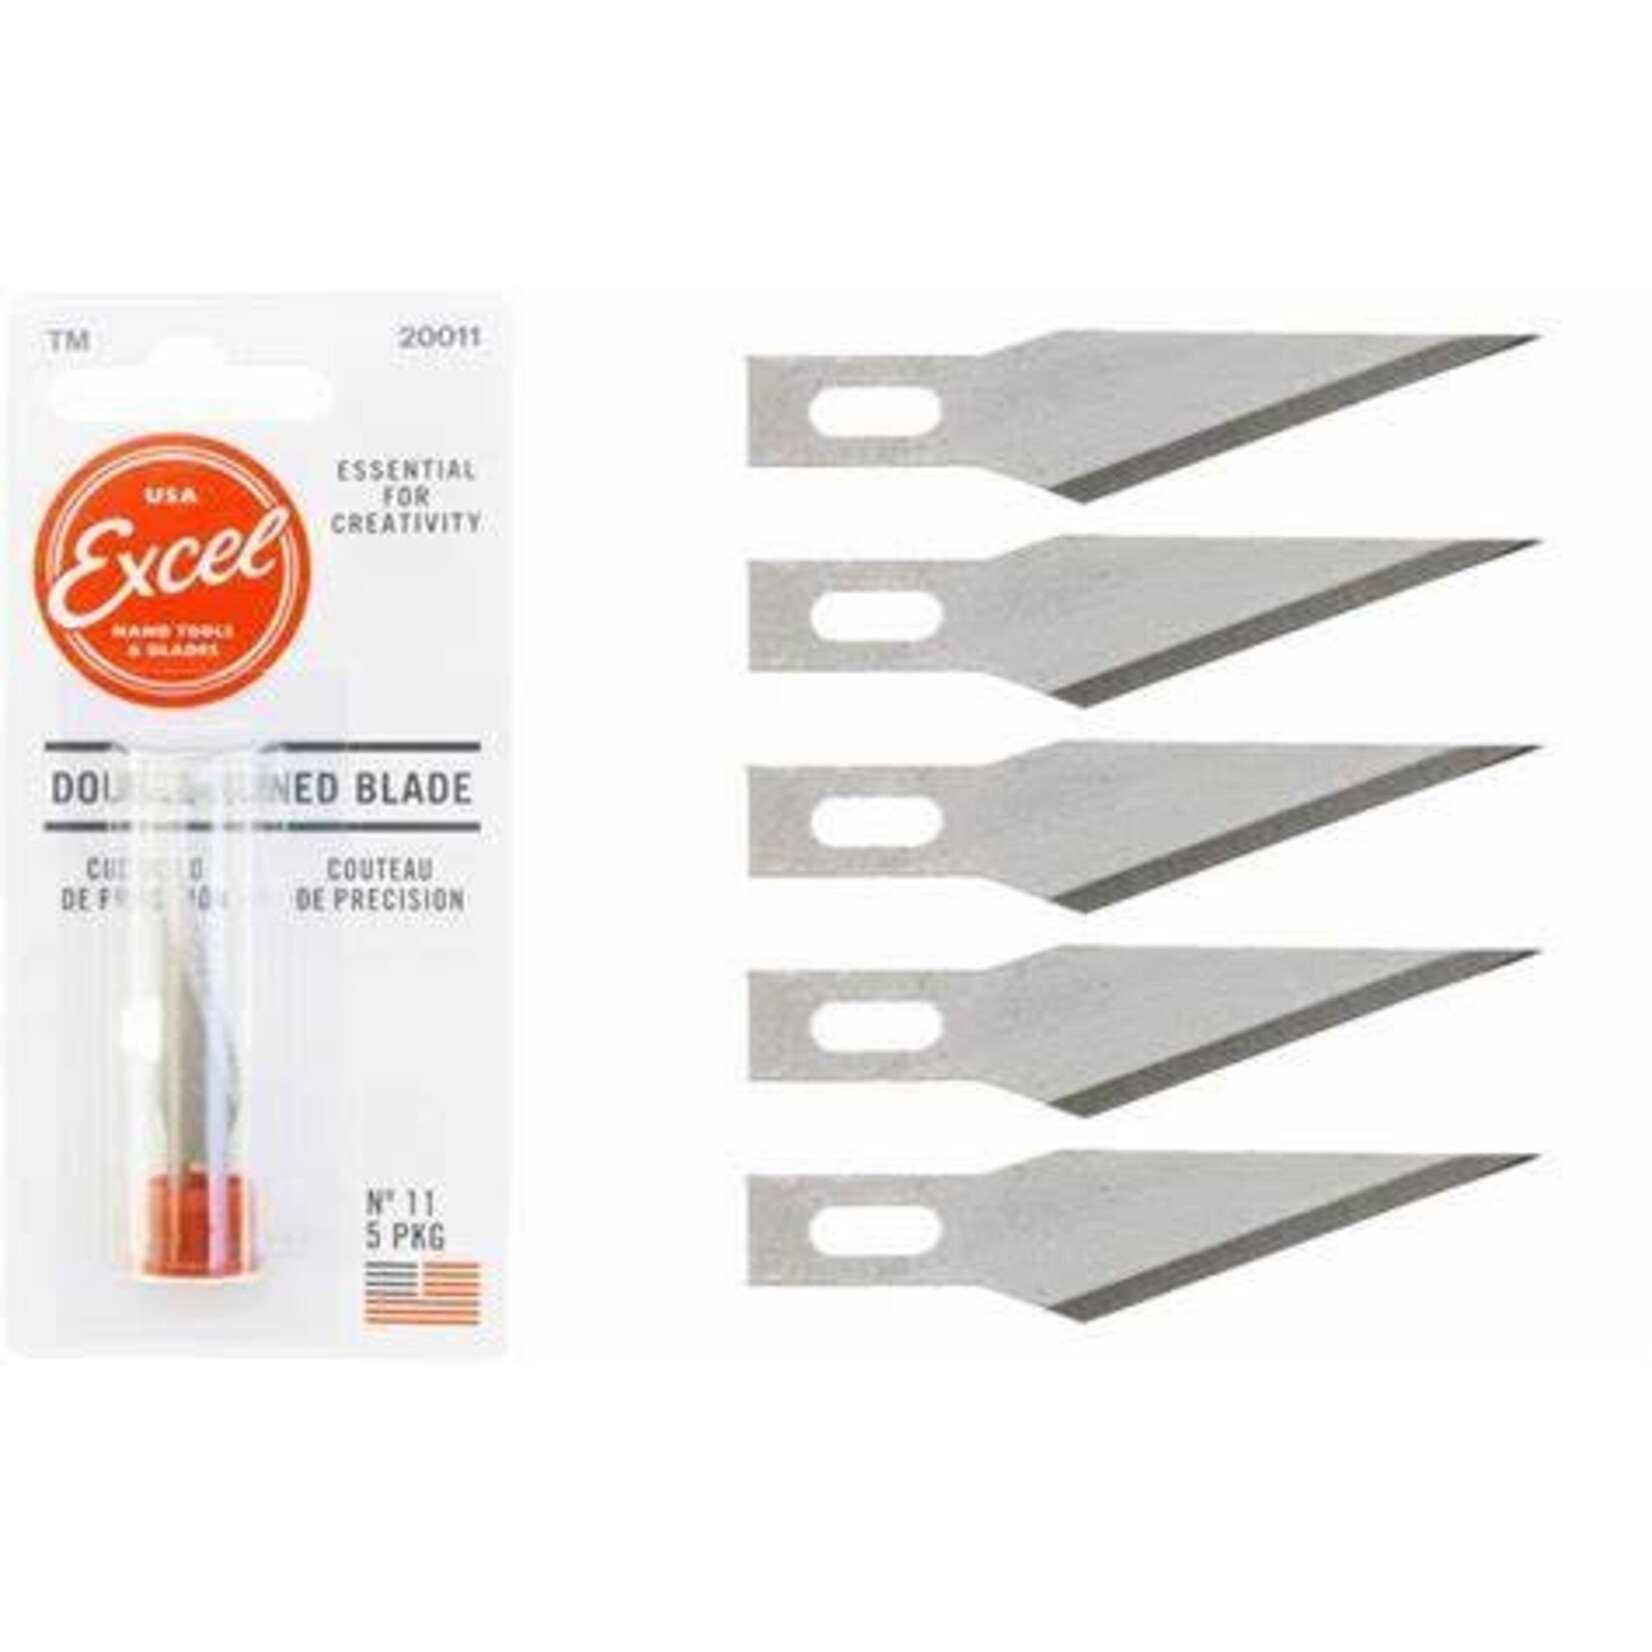 Excel Excel #11 Double Honed Blade (5) Set